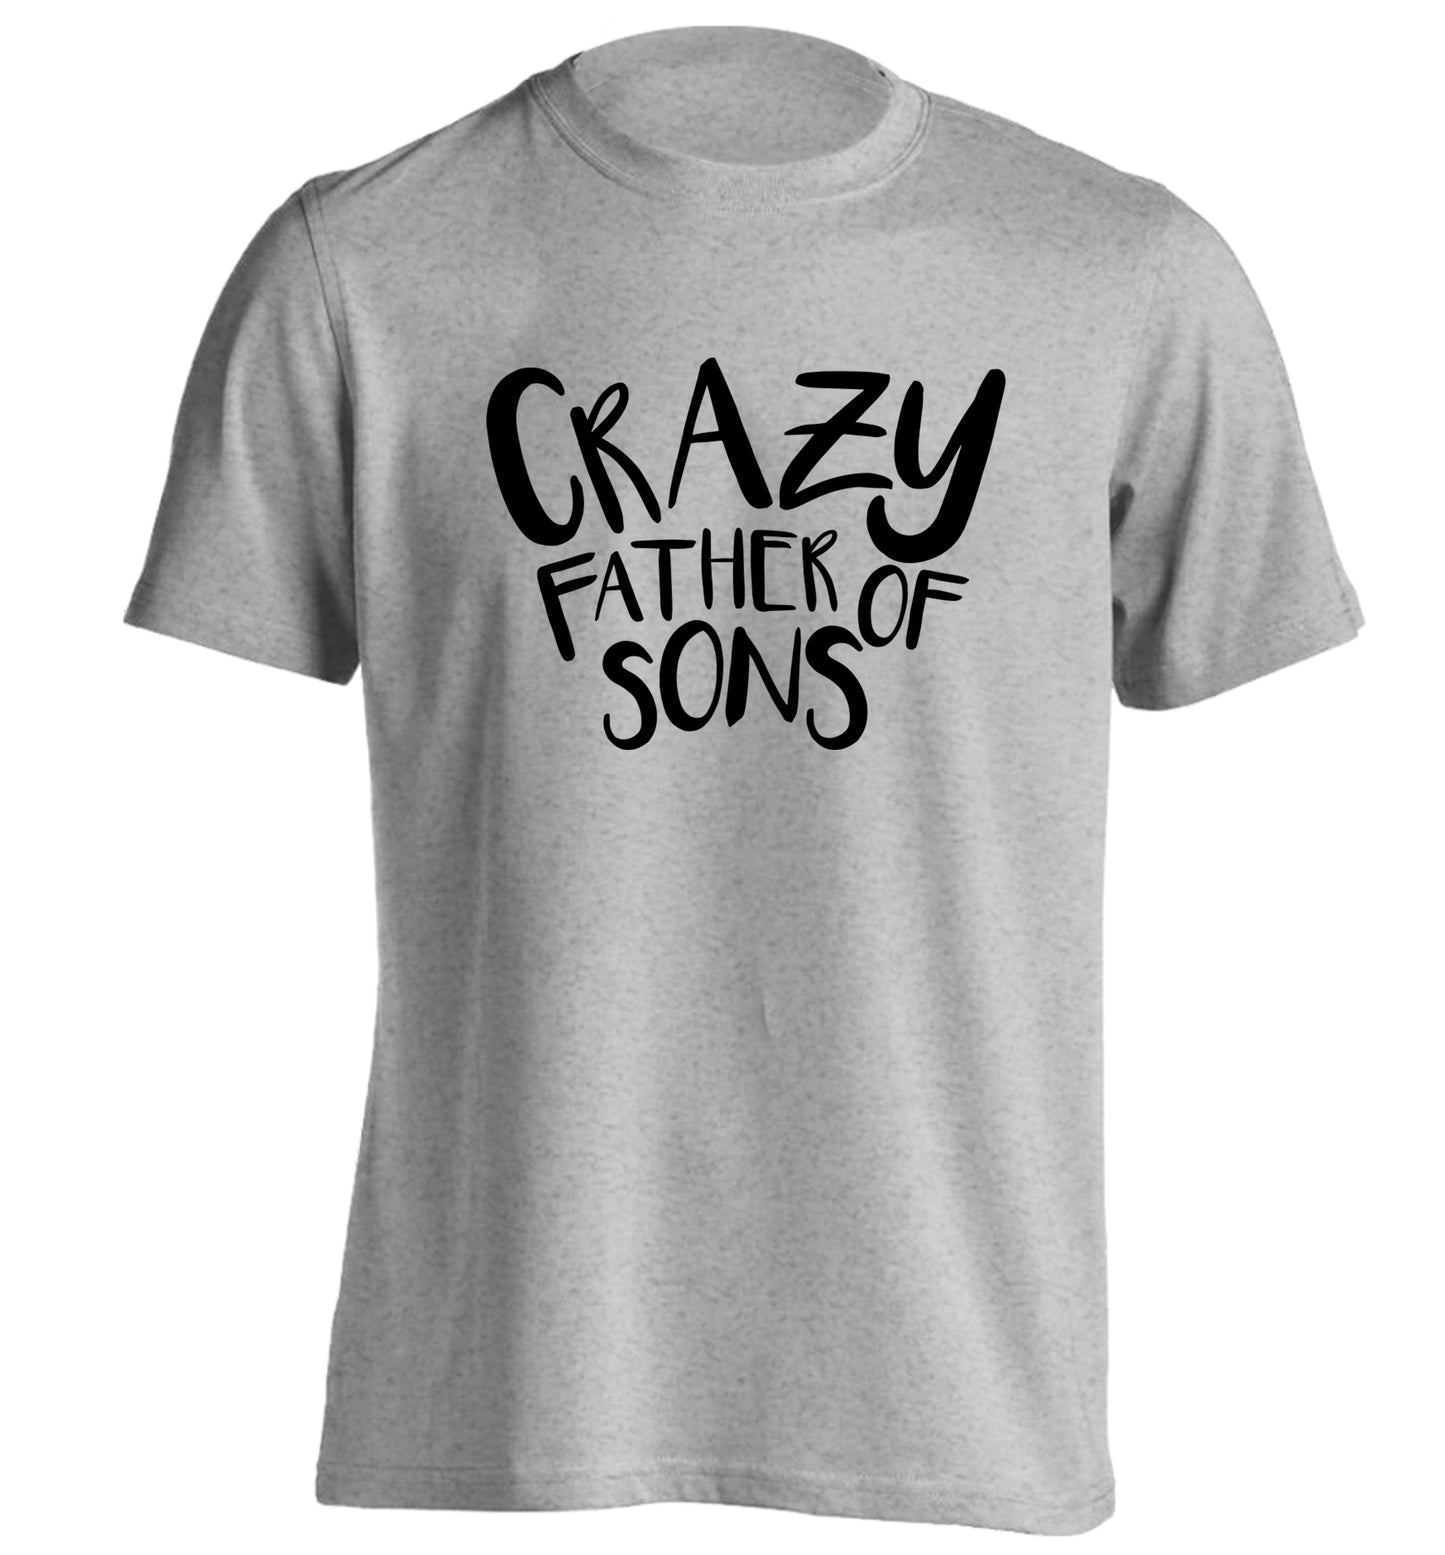 Crazy father of sons adults unisex grey Tshirt 2XL